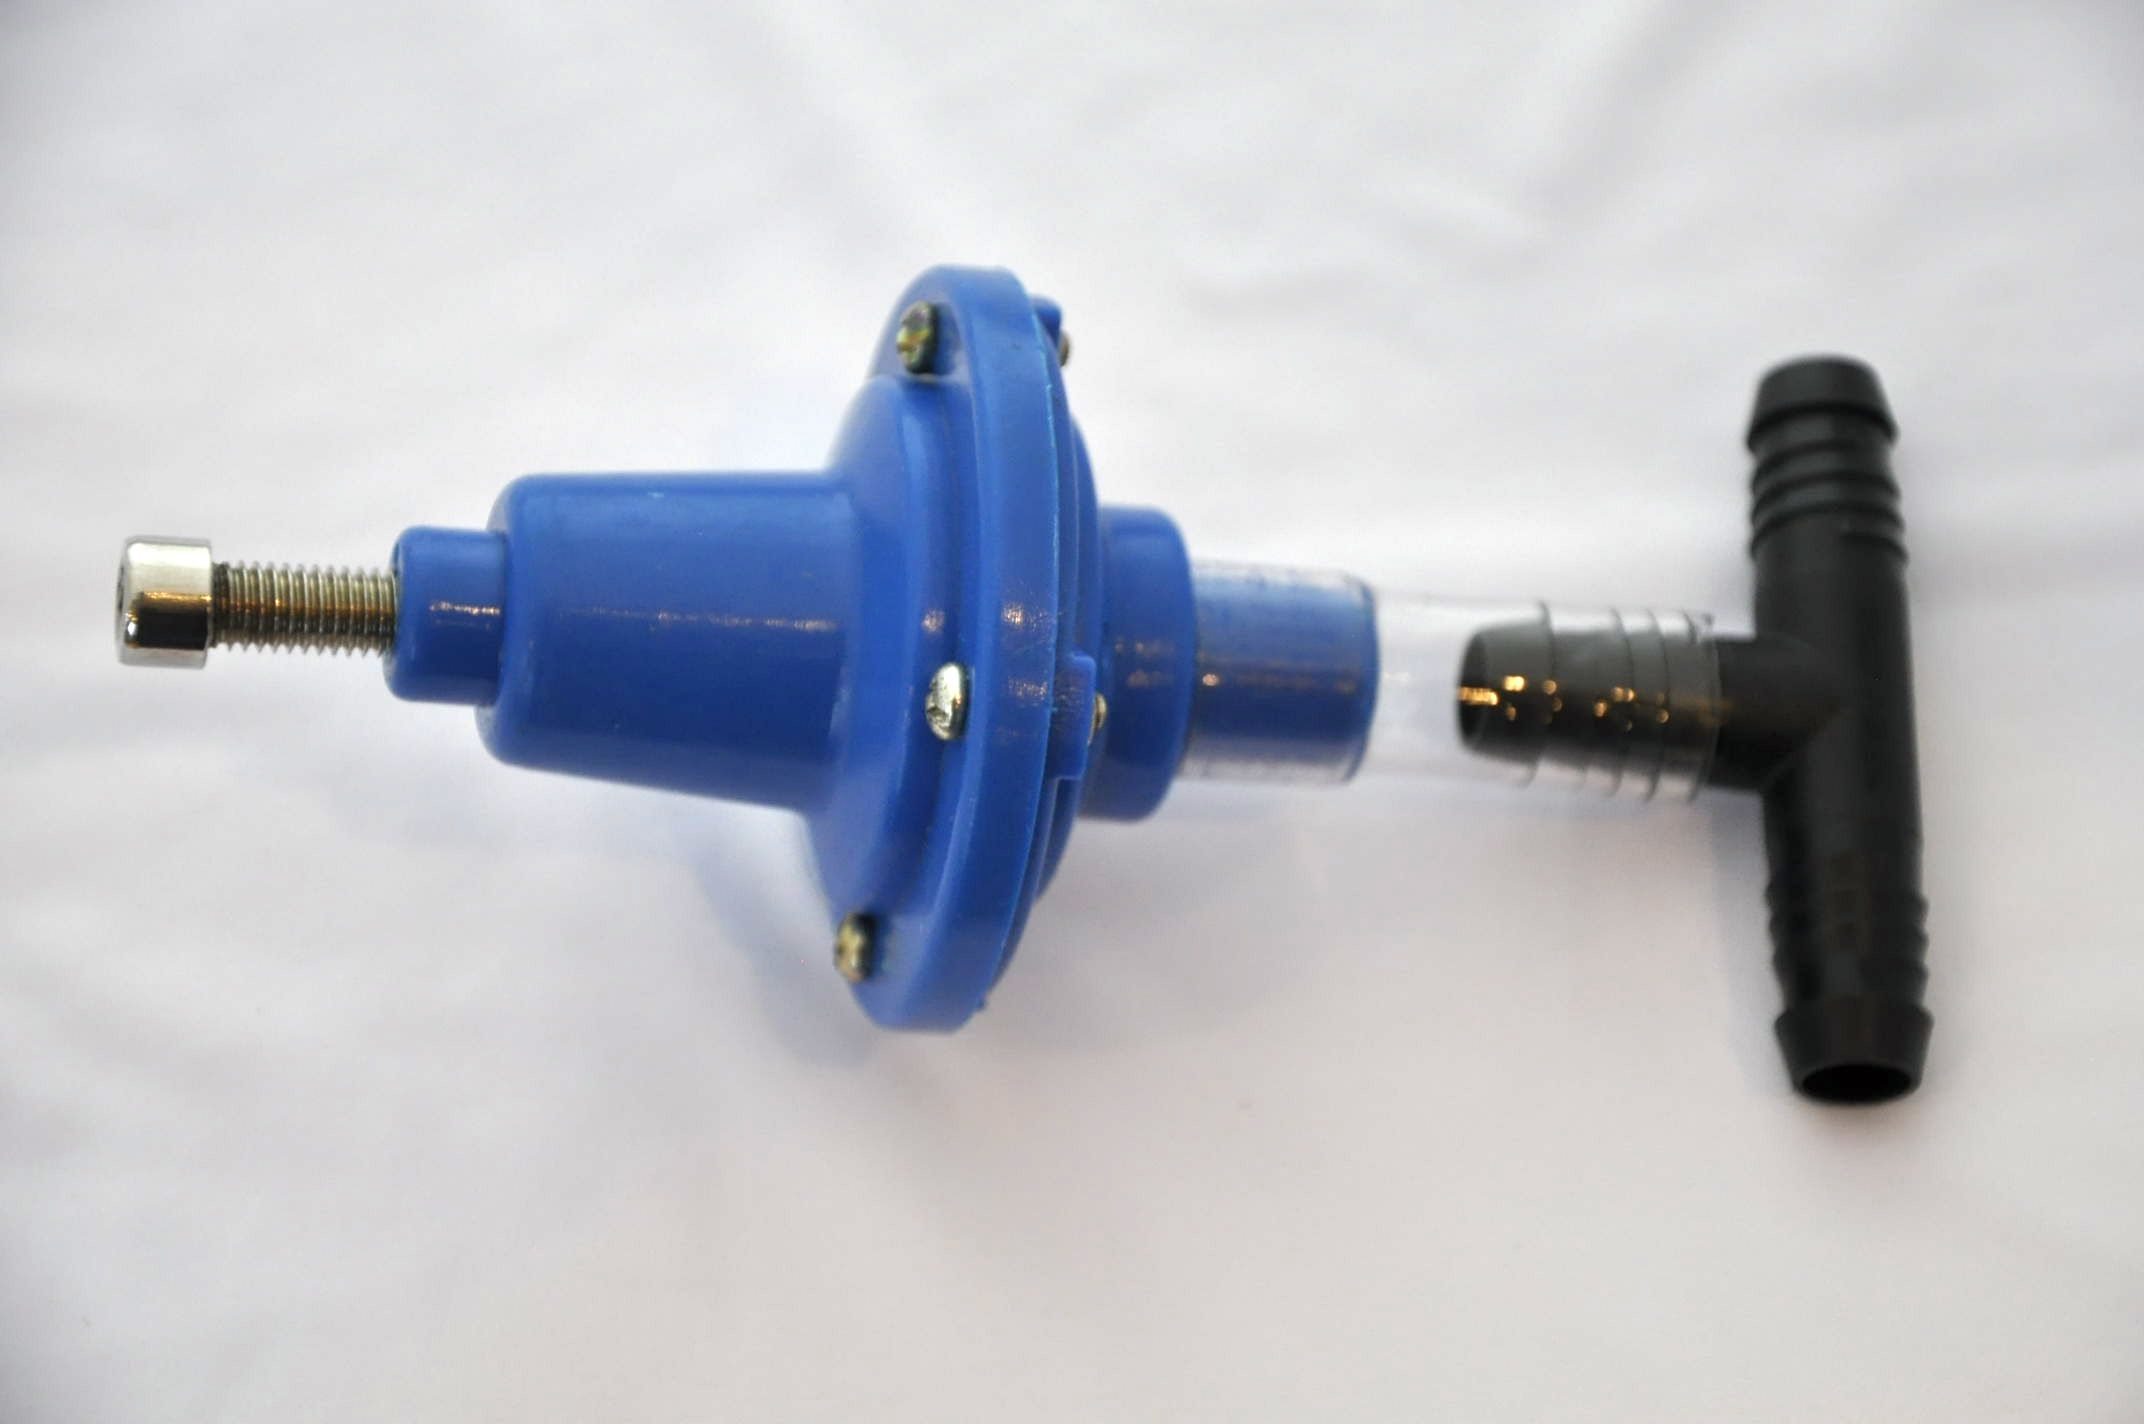 Vacuum Regulator with a Tee adapter for easy hookup to vacuum line